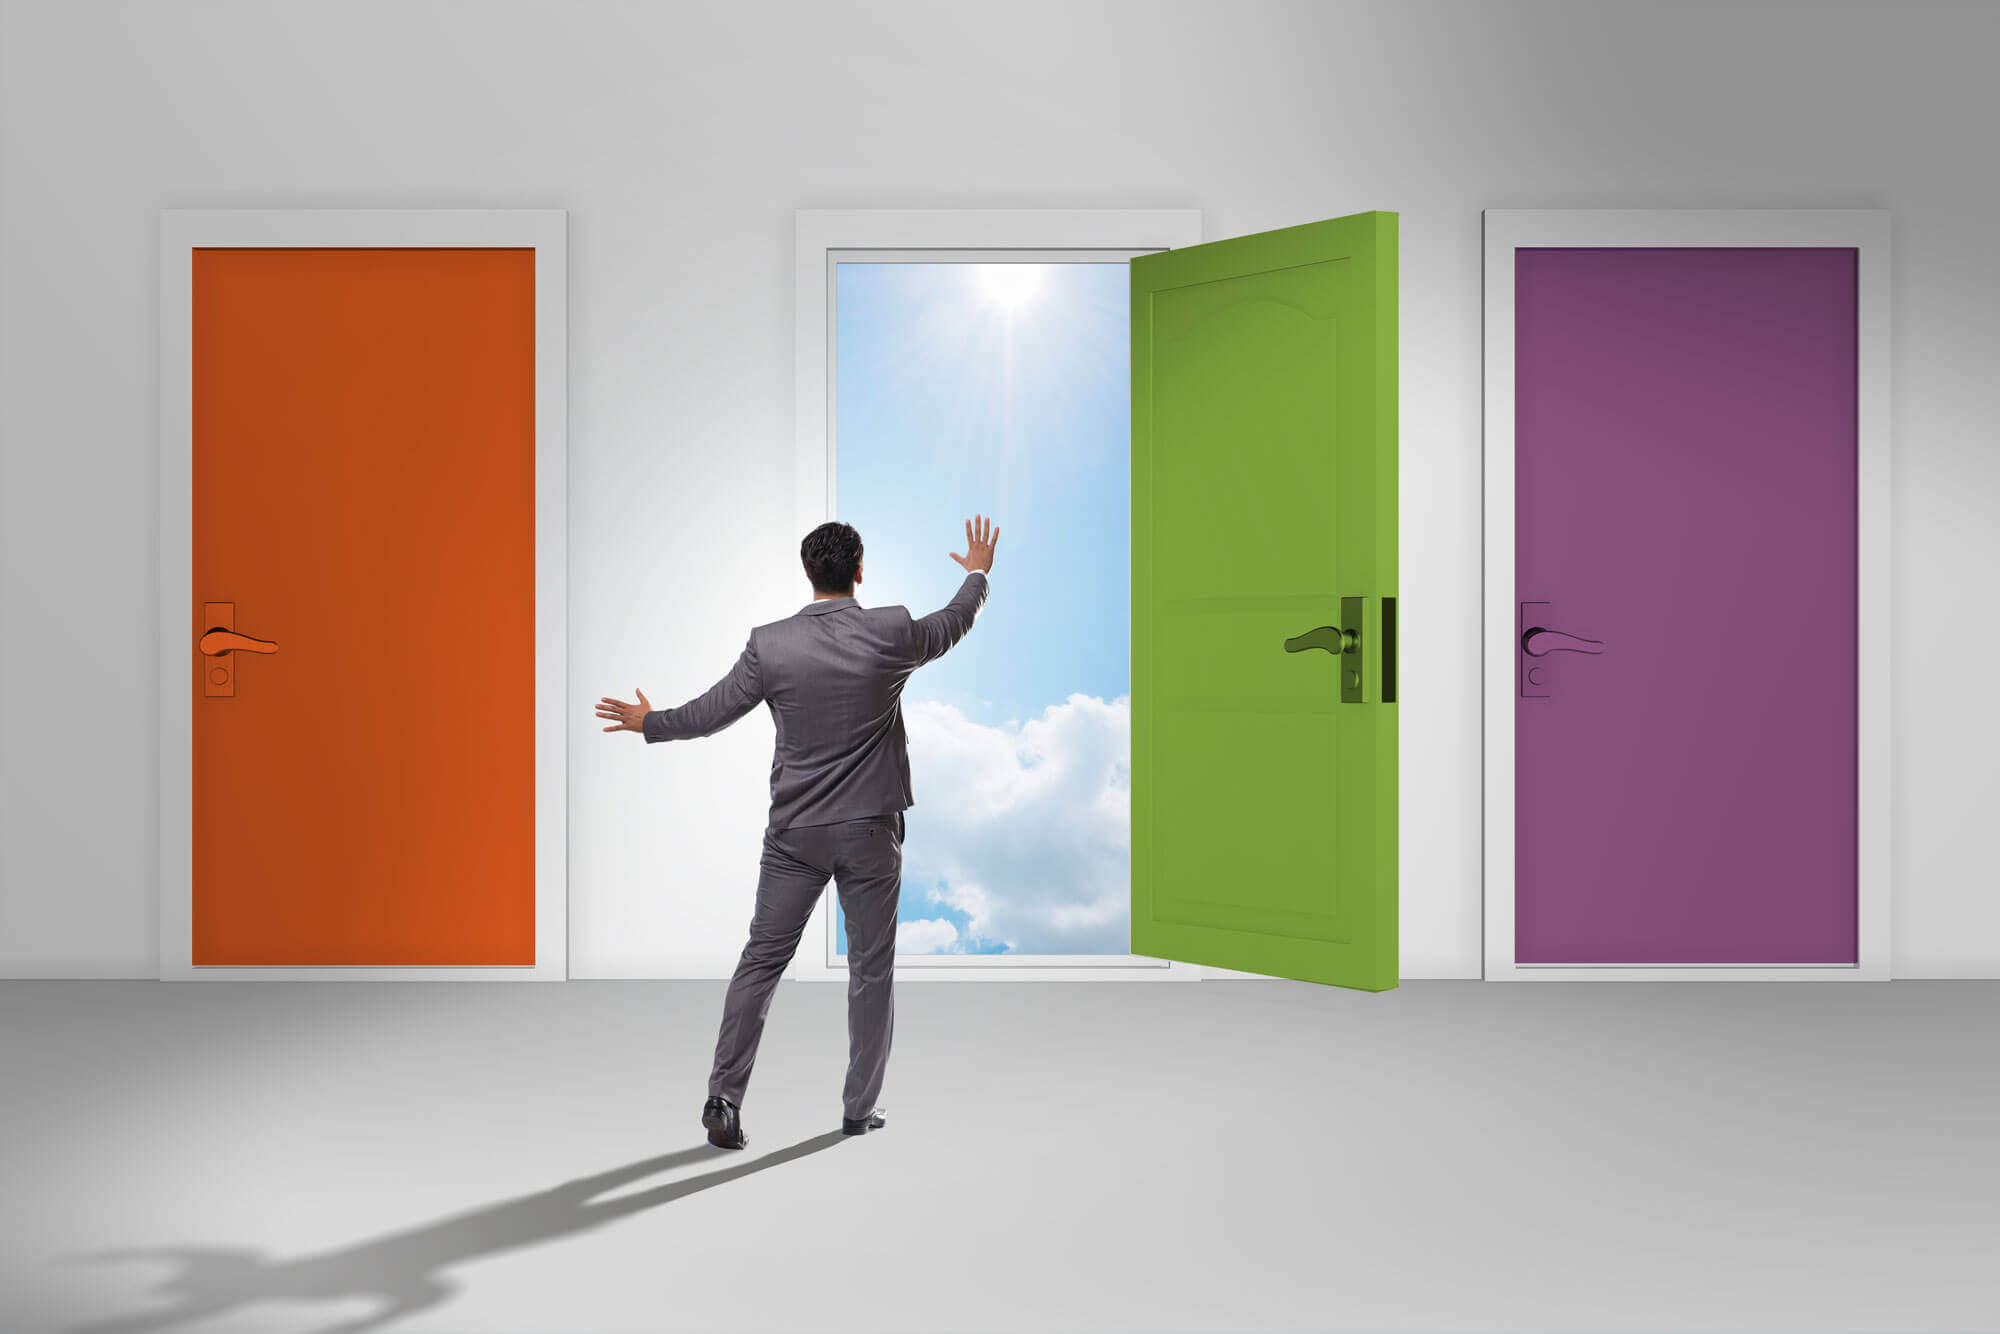 man dressed in a suit going to one of the three colored doors. the open door shows the sky with clouds